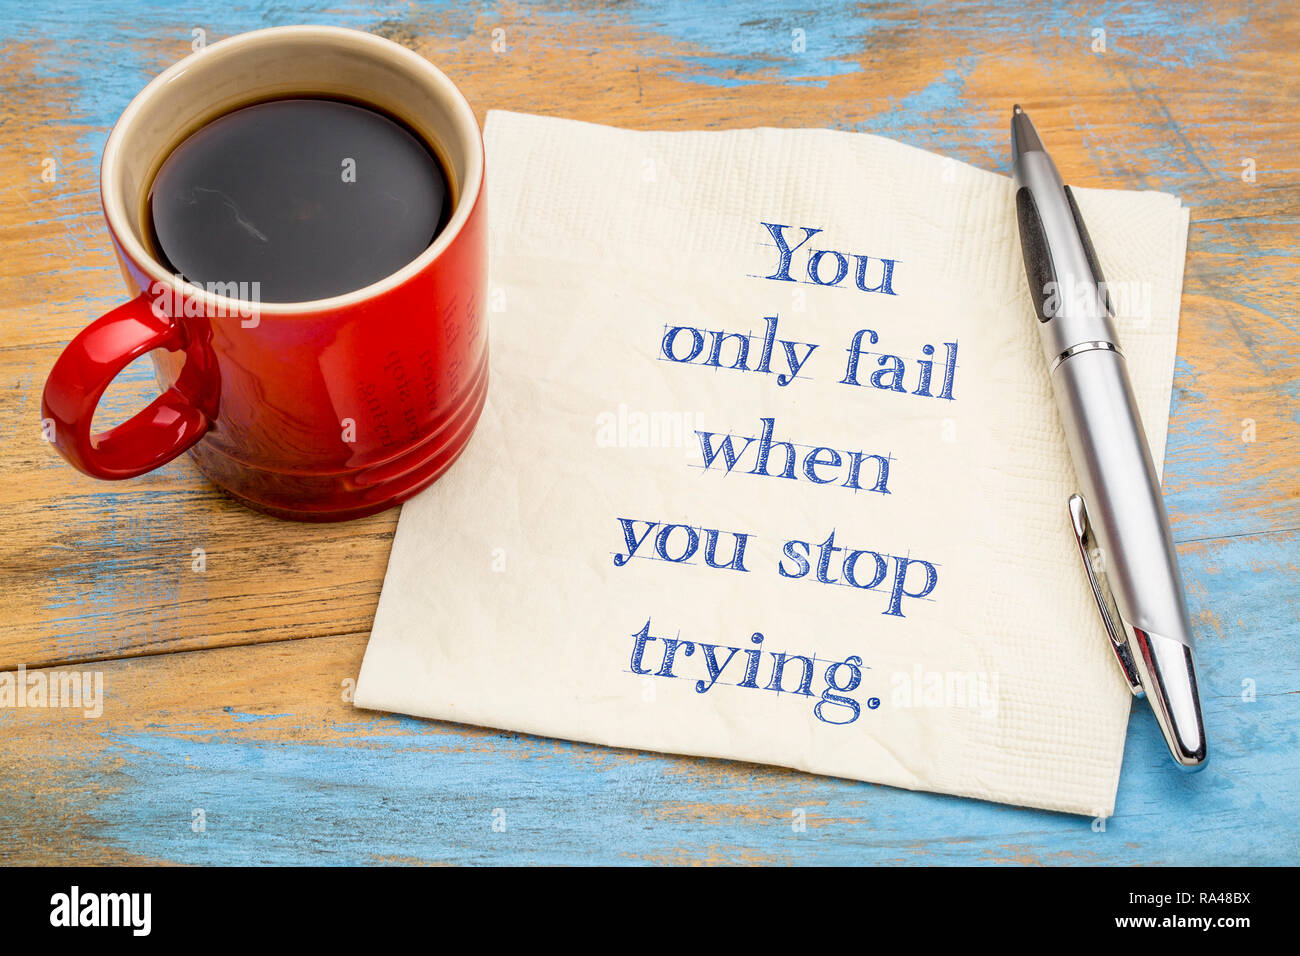 You only fail when you stop trying - handwriting on a napkin with a cup of coffee Stock Photo